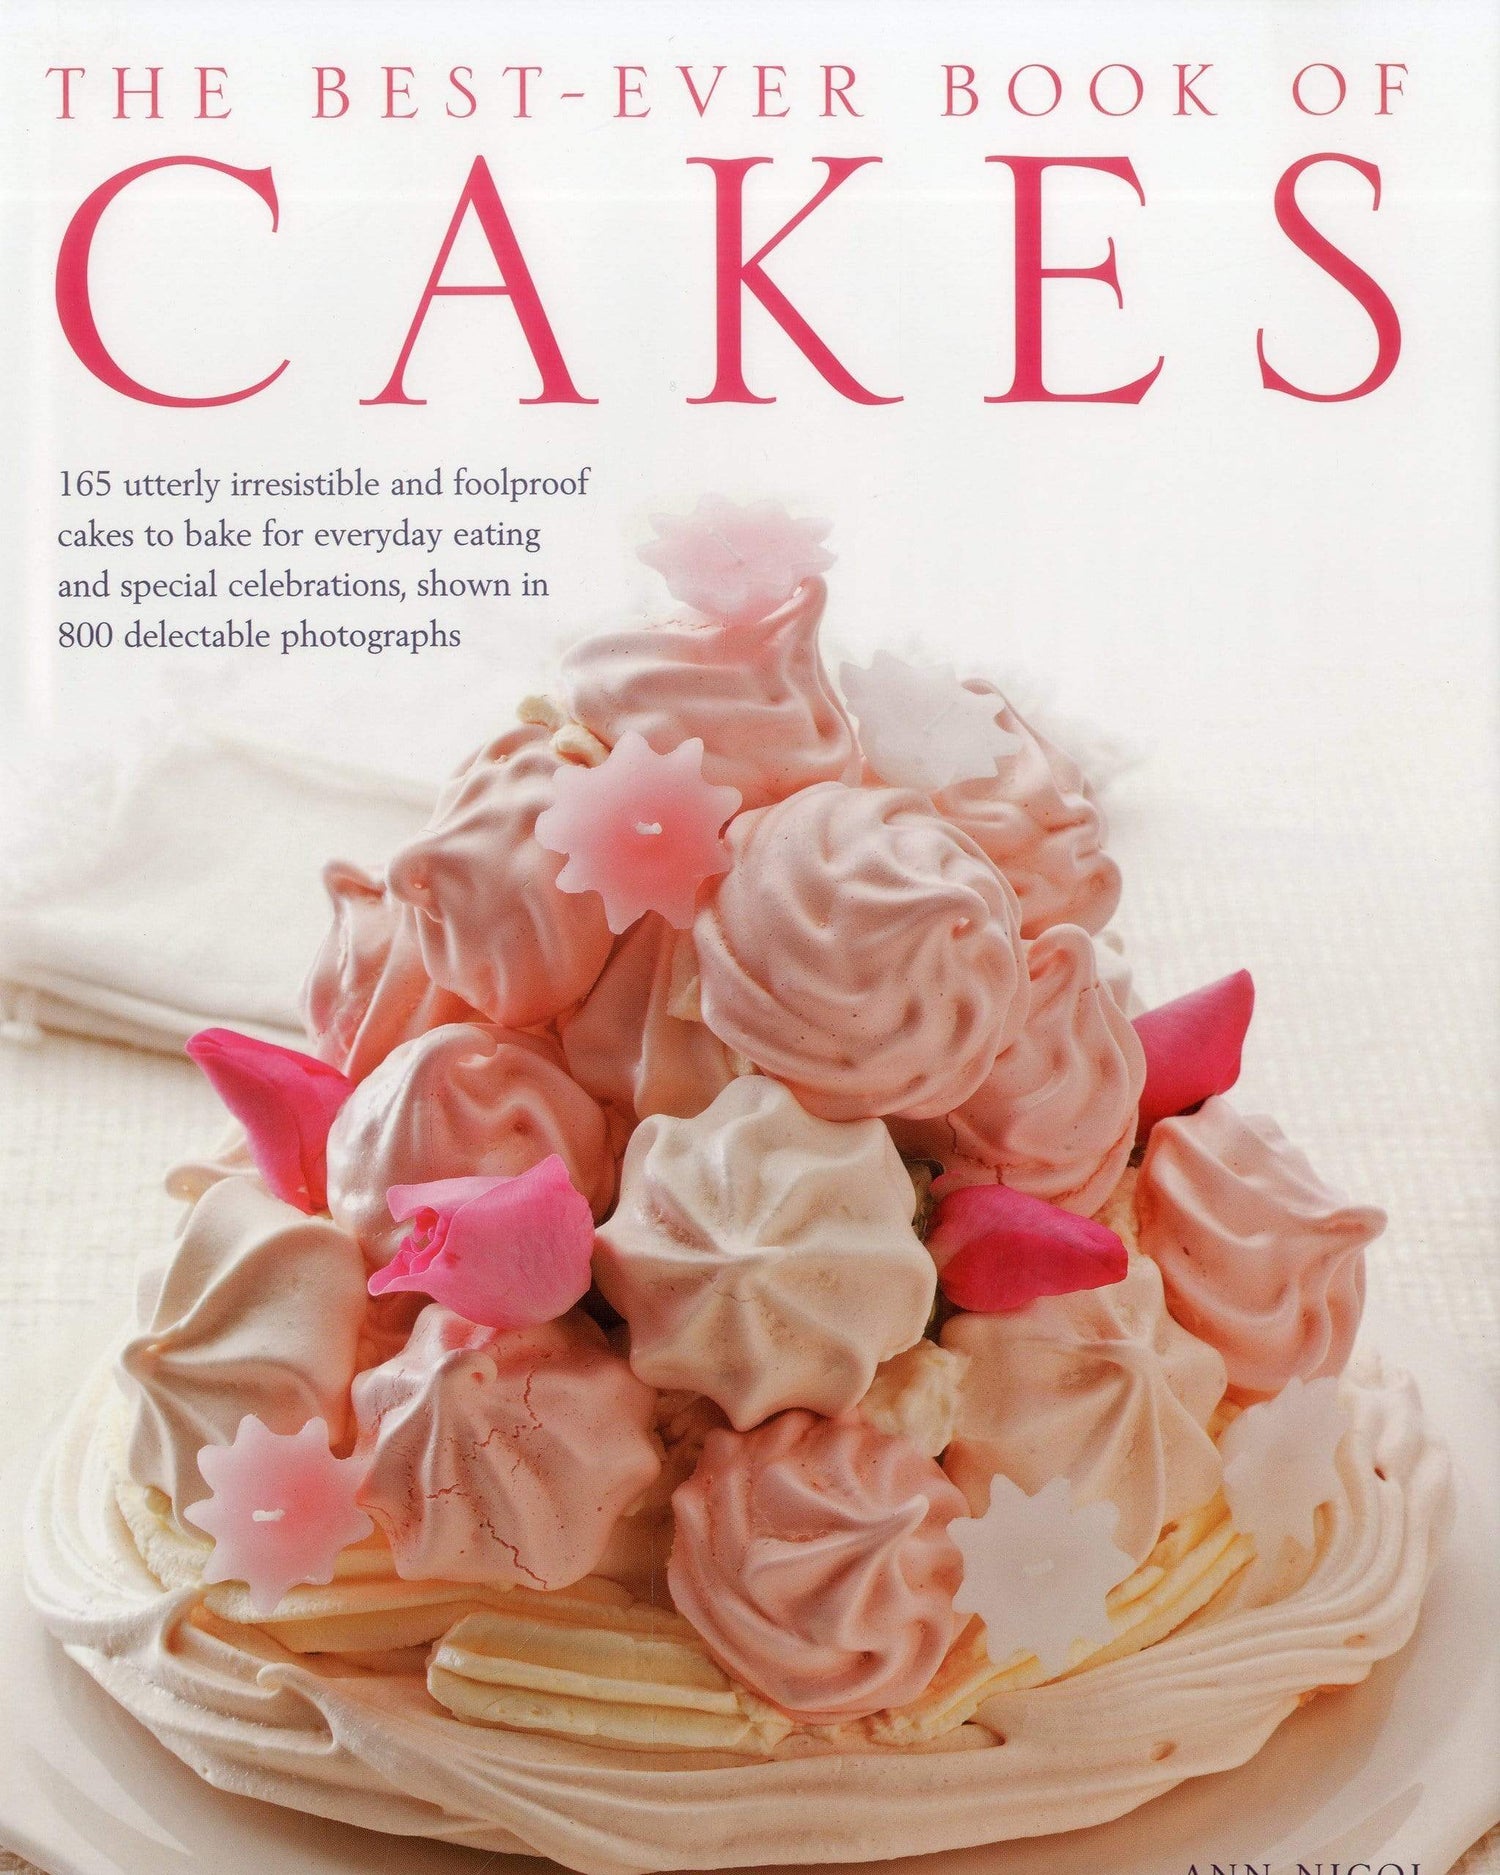 BEST EVER BOOK OF CAKES:165 UTTERLY